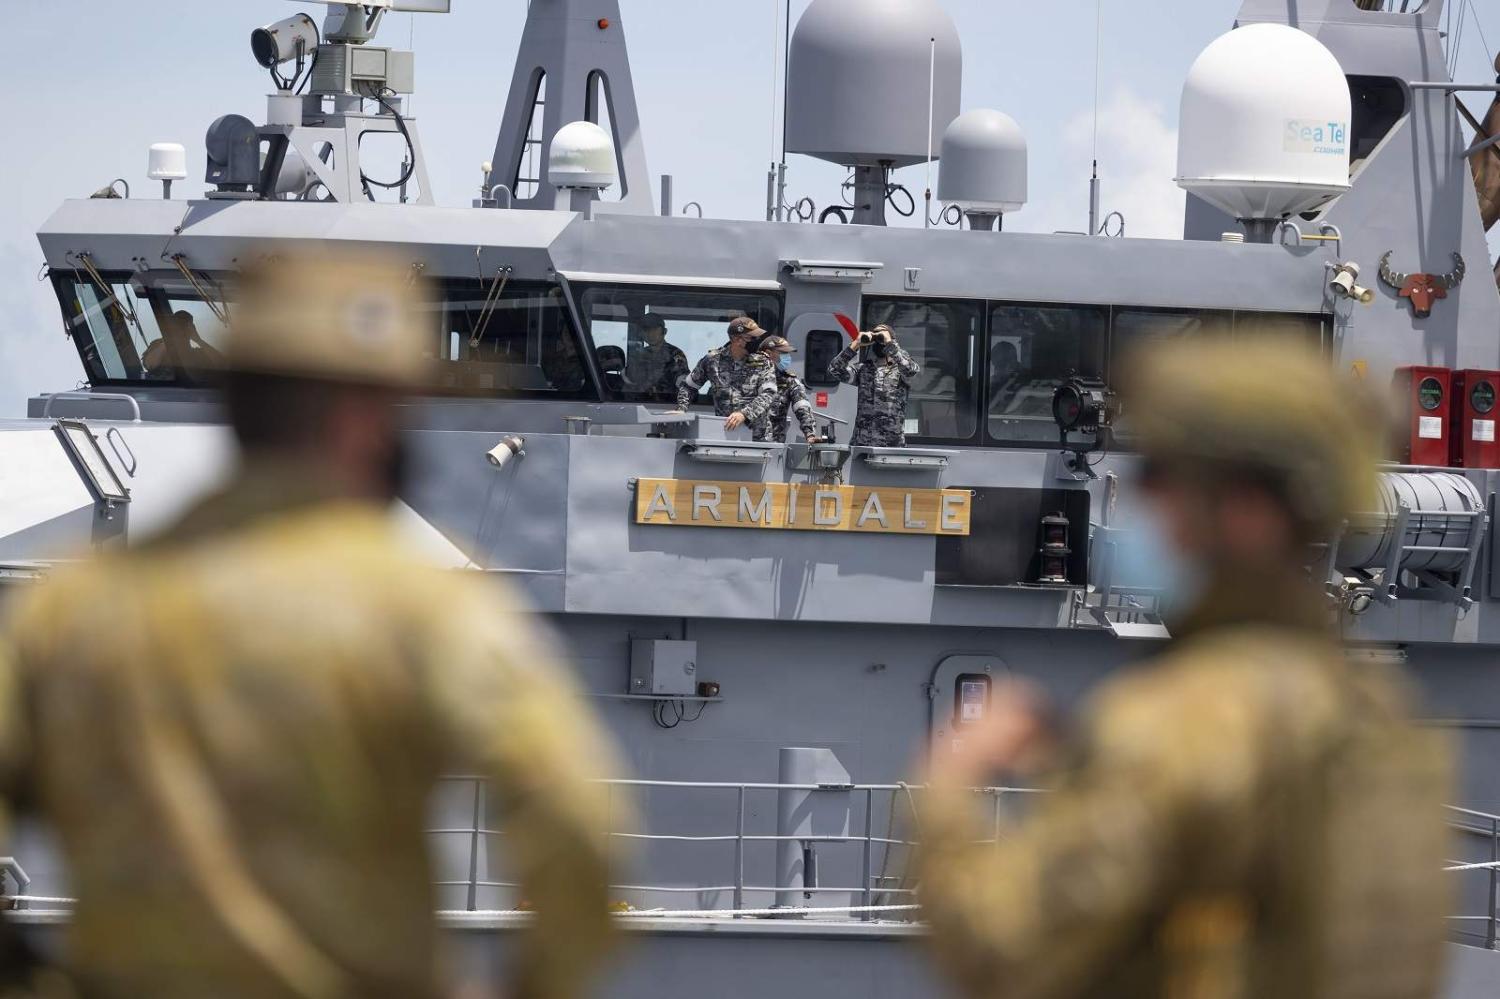 HMAS Armidale in the Port of Honiara on 1 December 2021 after deadly protests in November (Brandon Grey/Australian Department of Defence via Getty Images)